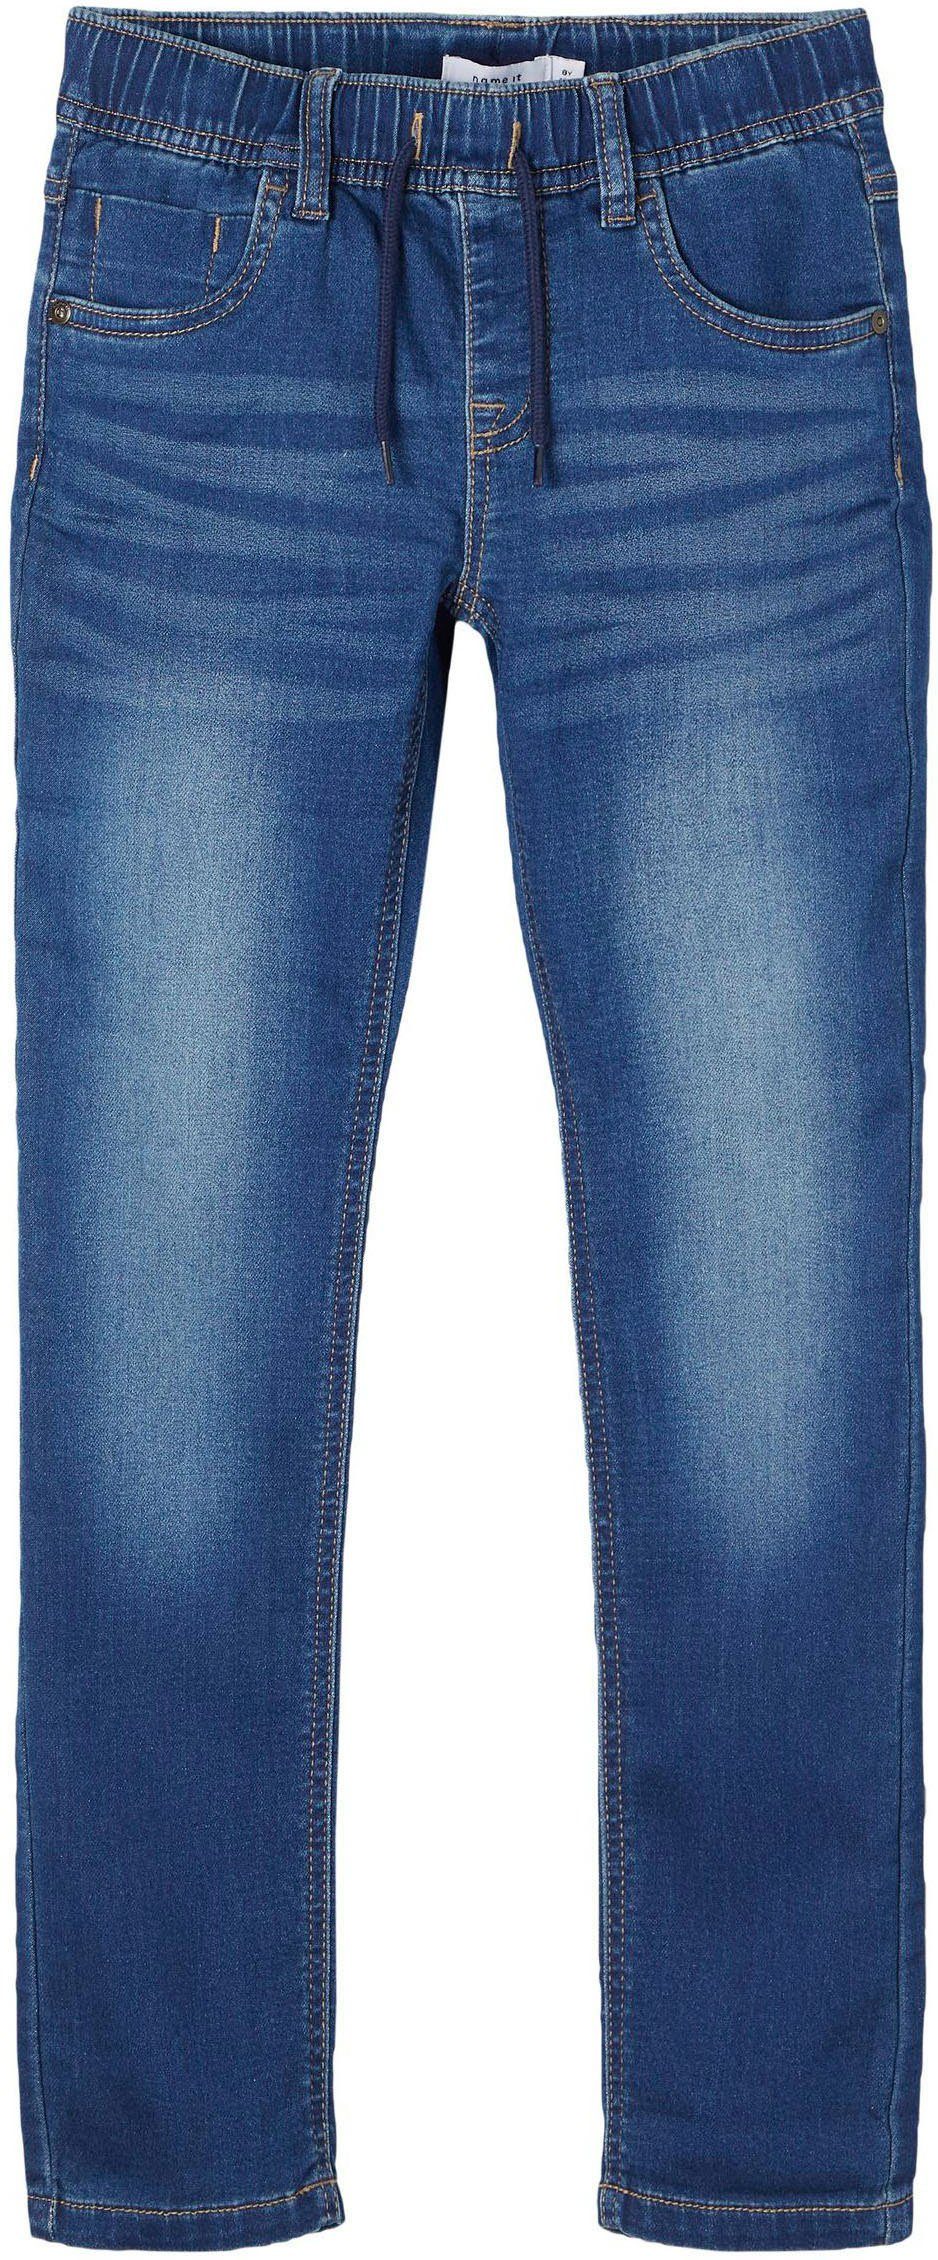 NKMROBIN It Stretch-Jeans DNMTHAYERS Name 3454